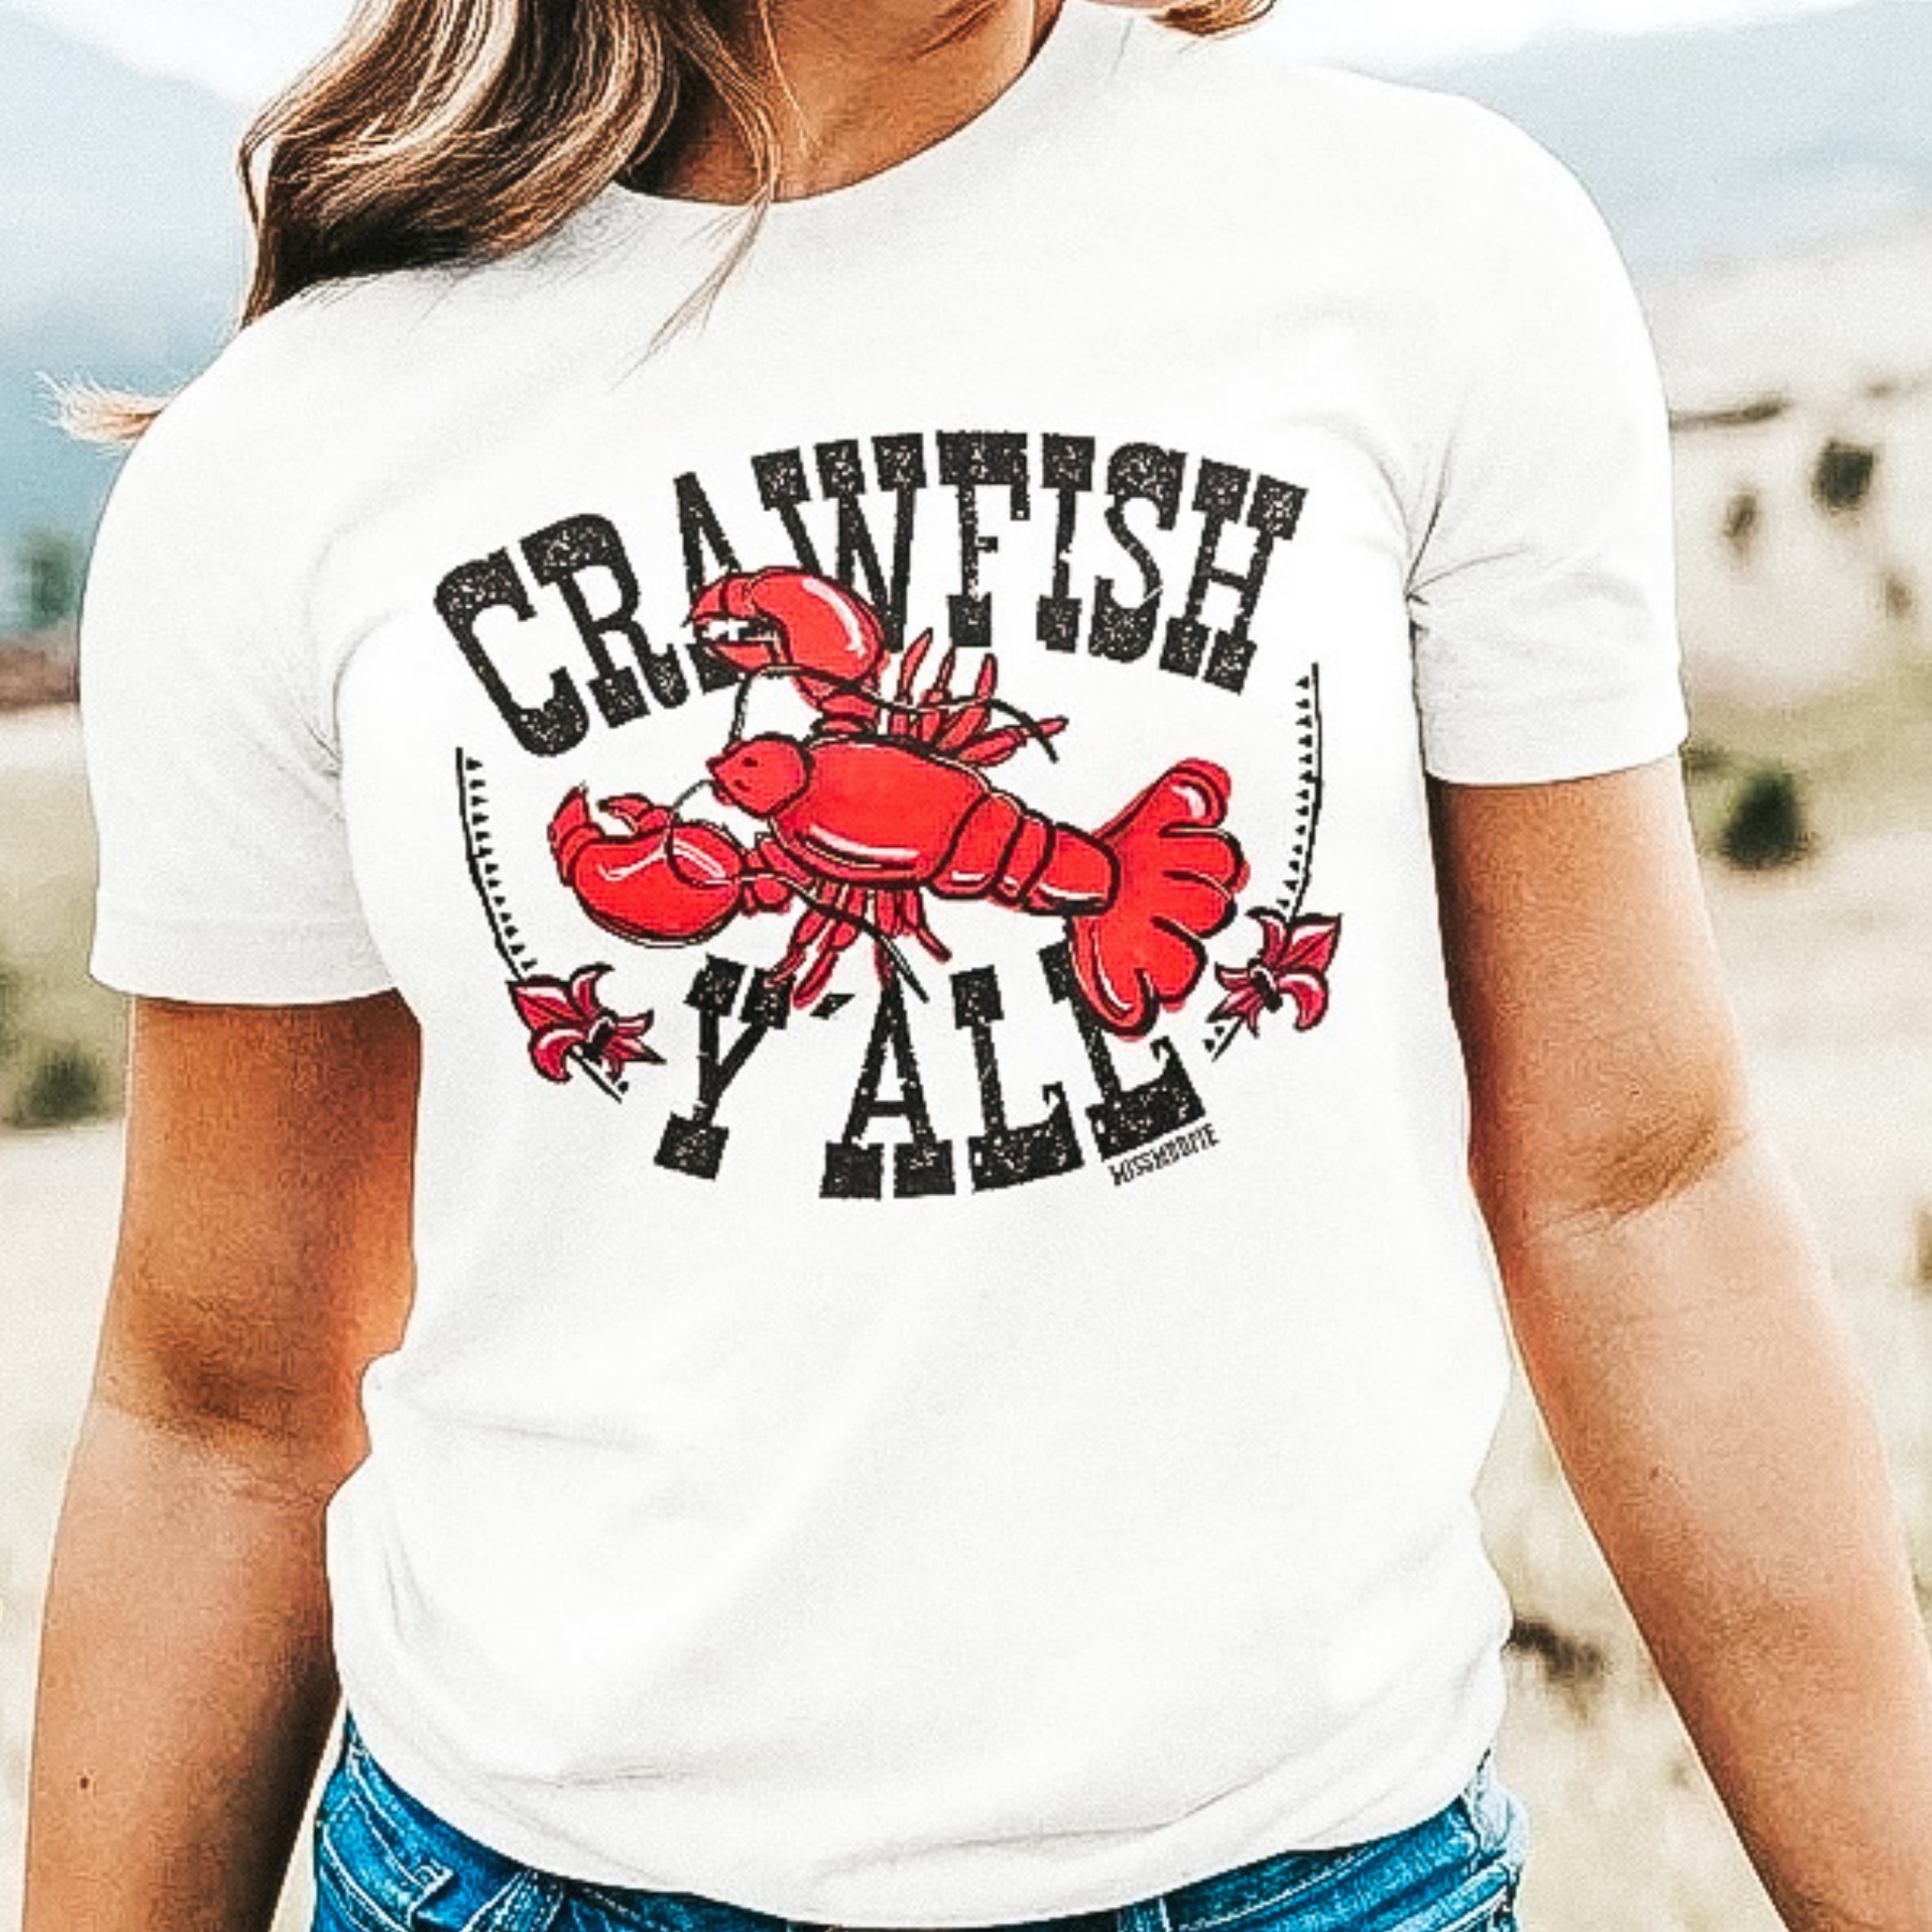 White short sleeve tee shirt with crew neckline. The graphic  has a sideways crawfish that says " Crawfish Y'all."